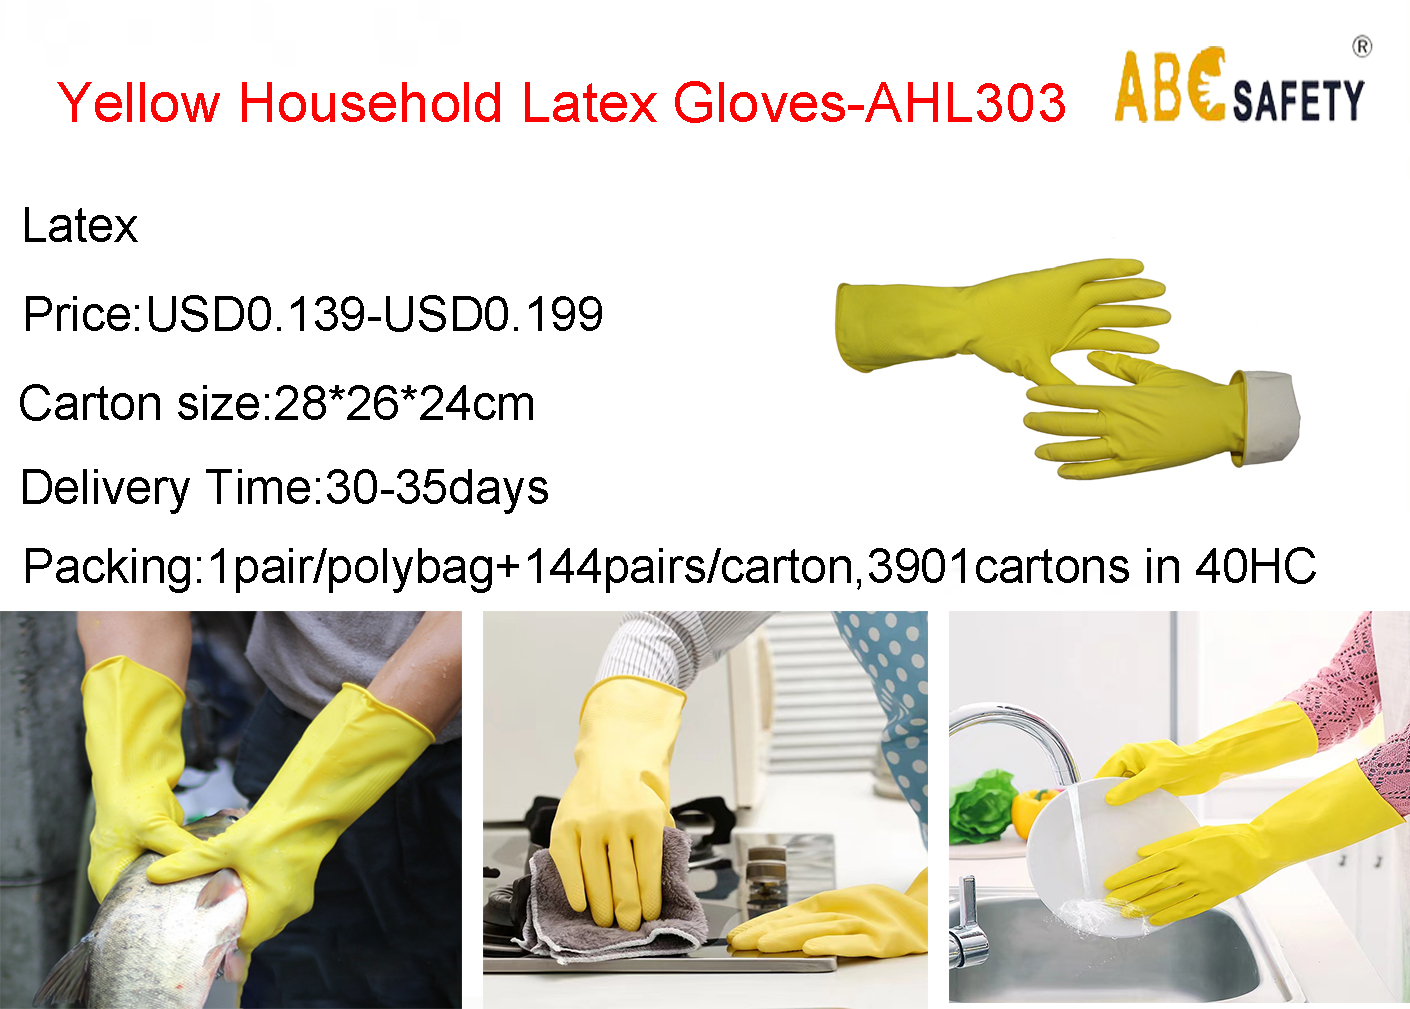 Yellow Household Latex Gloves Sale Price